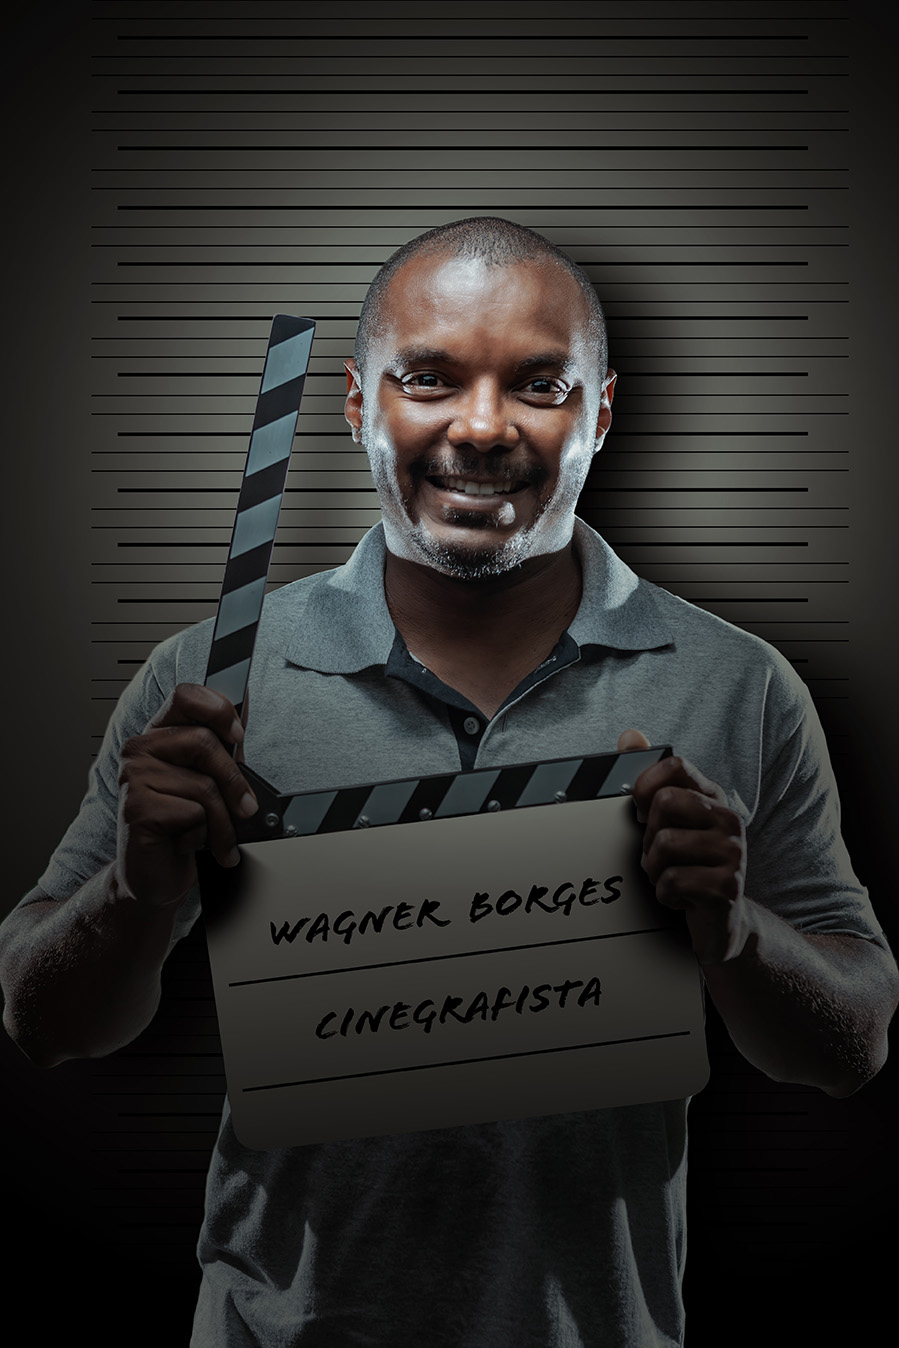 Wagner Borges - Cinegrafista